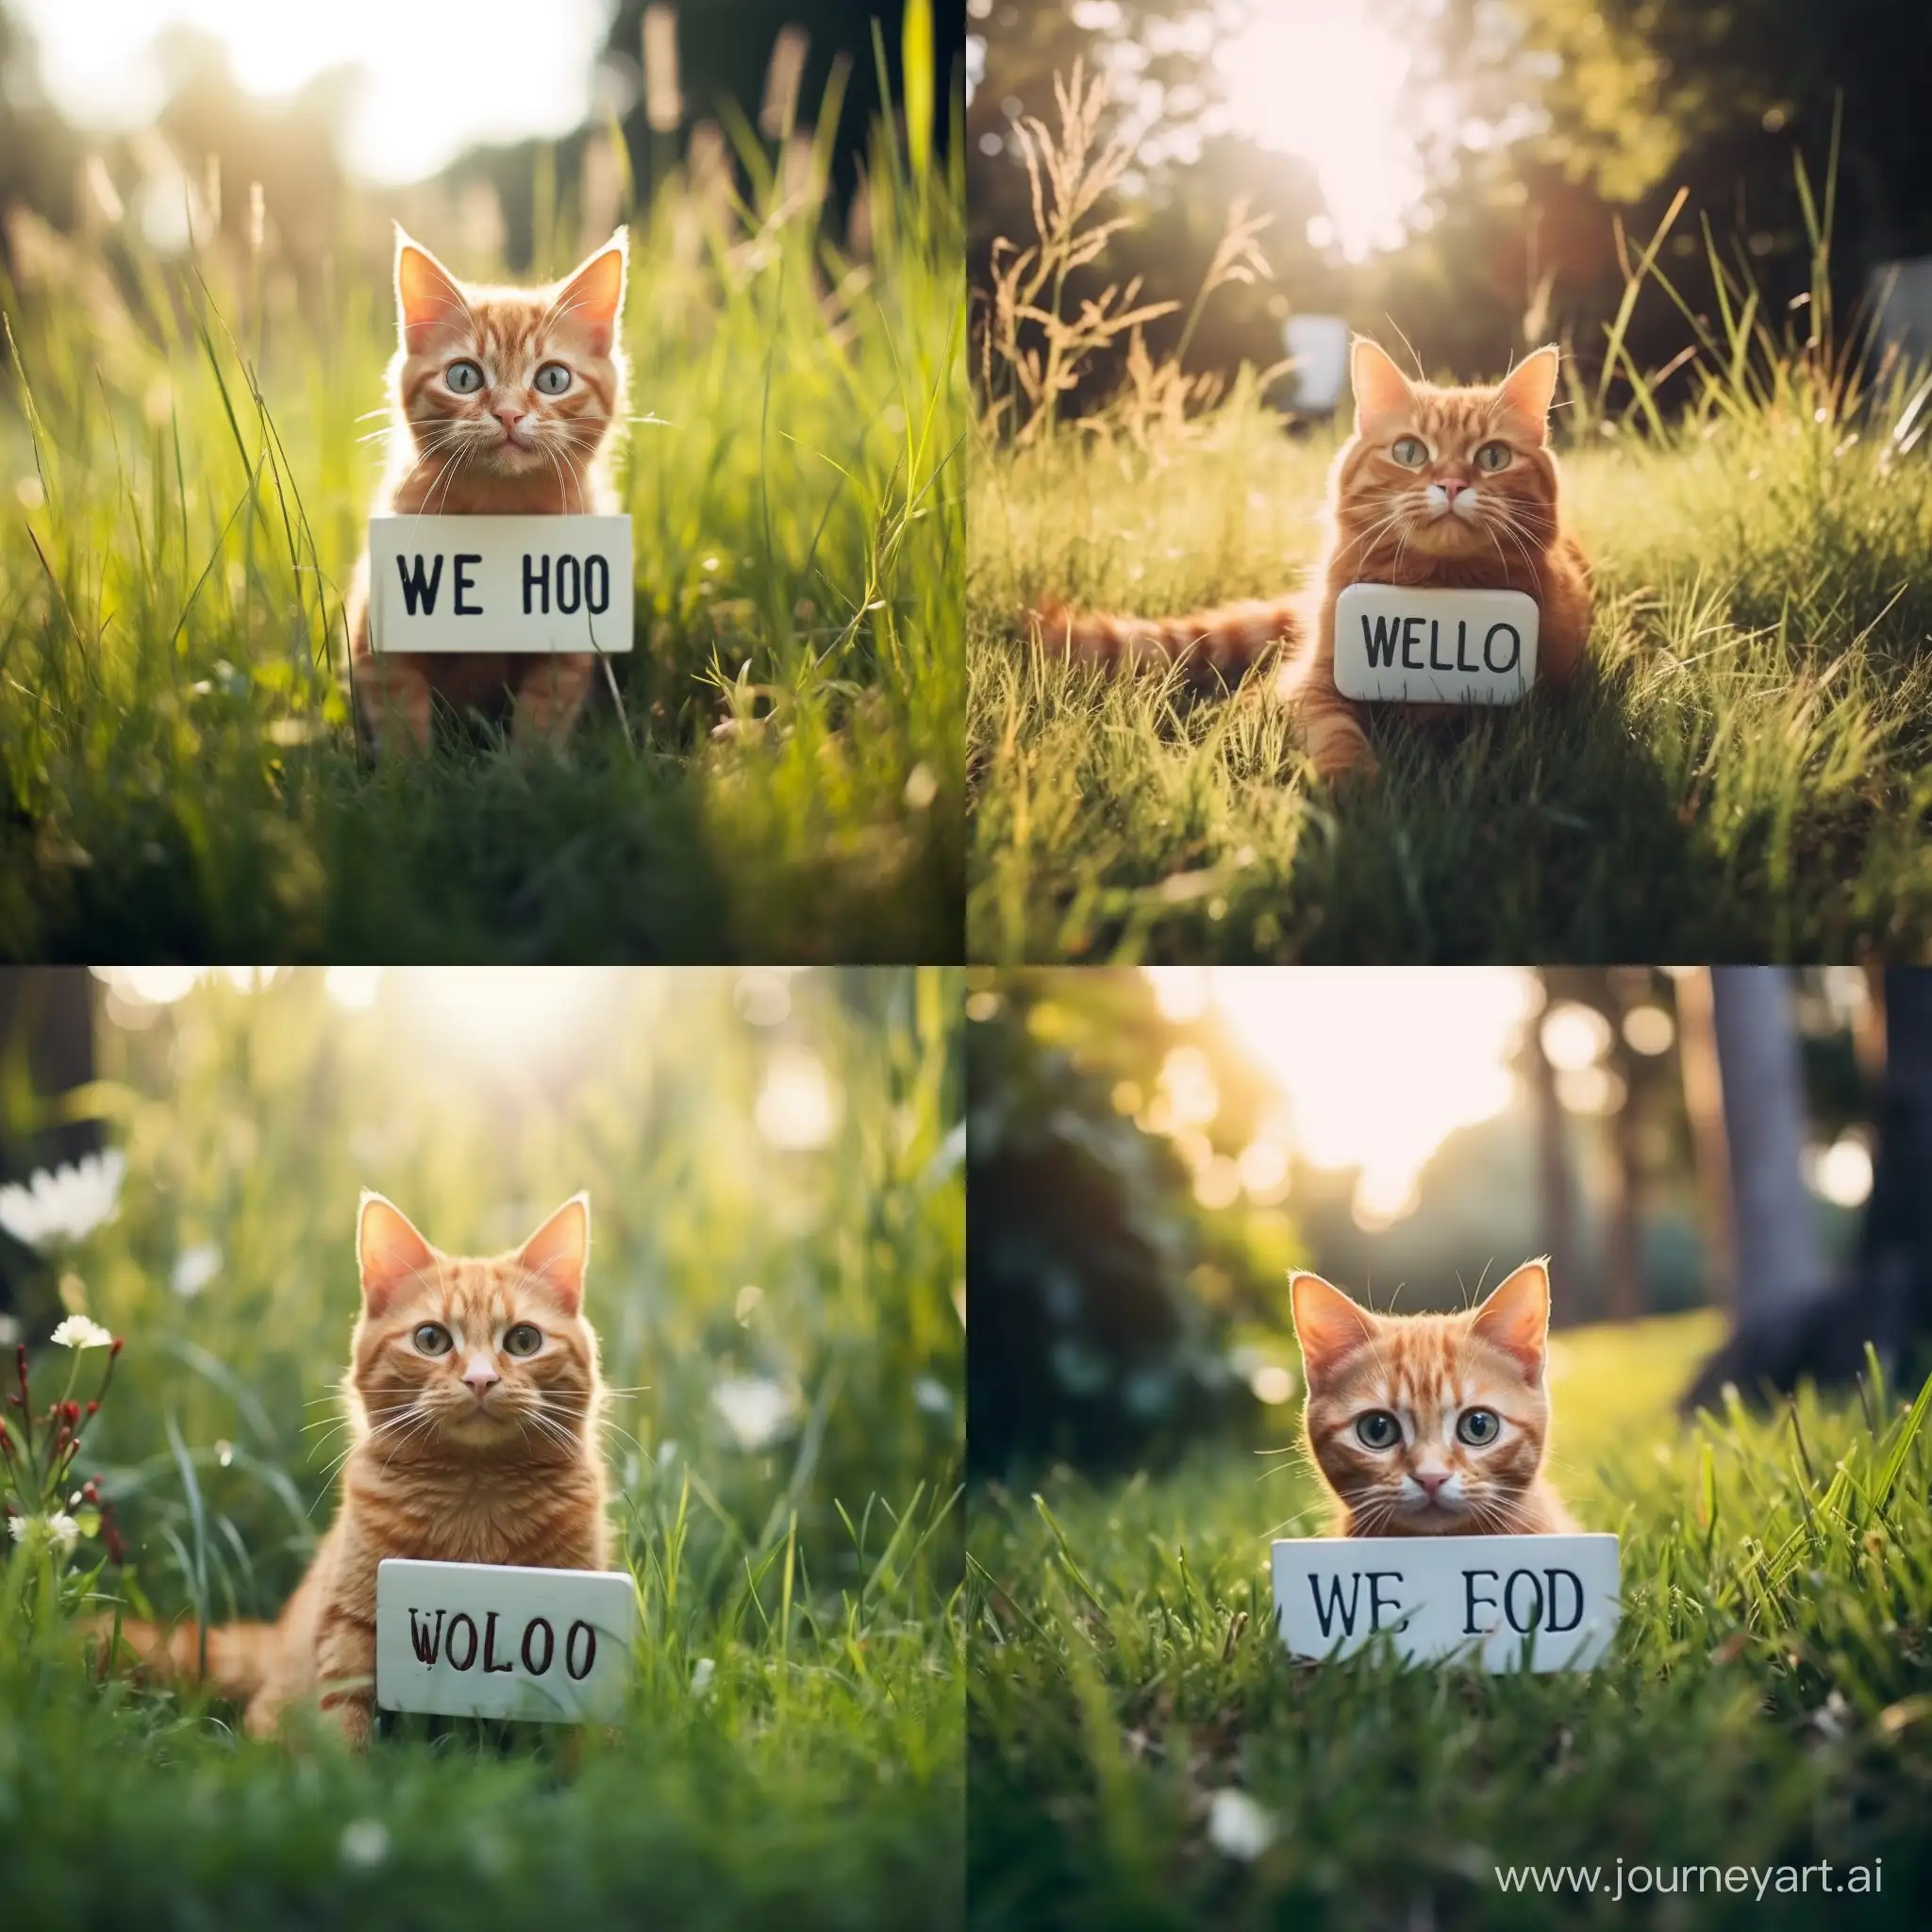 Friendly-Orange-Tabby-Cat-Greeting-the-World-in-a-Grass-Setting